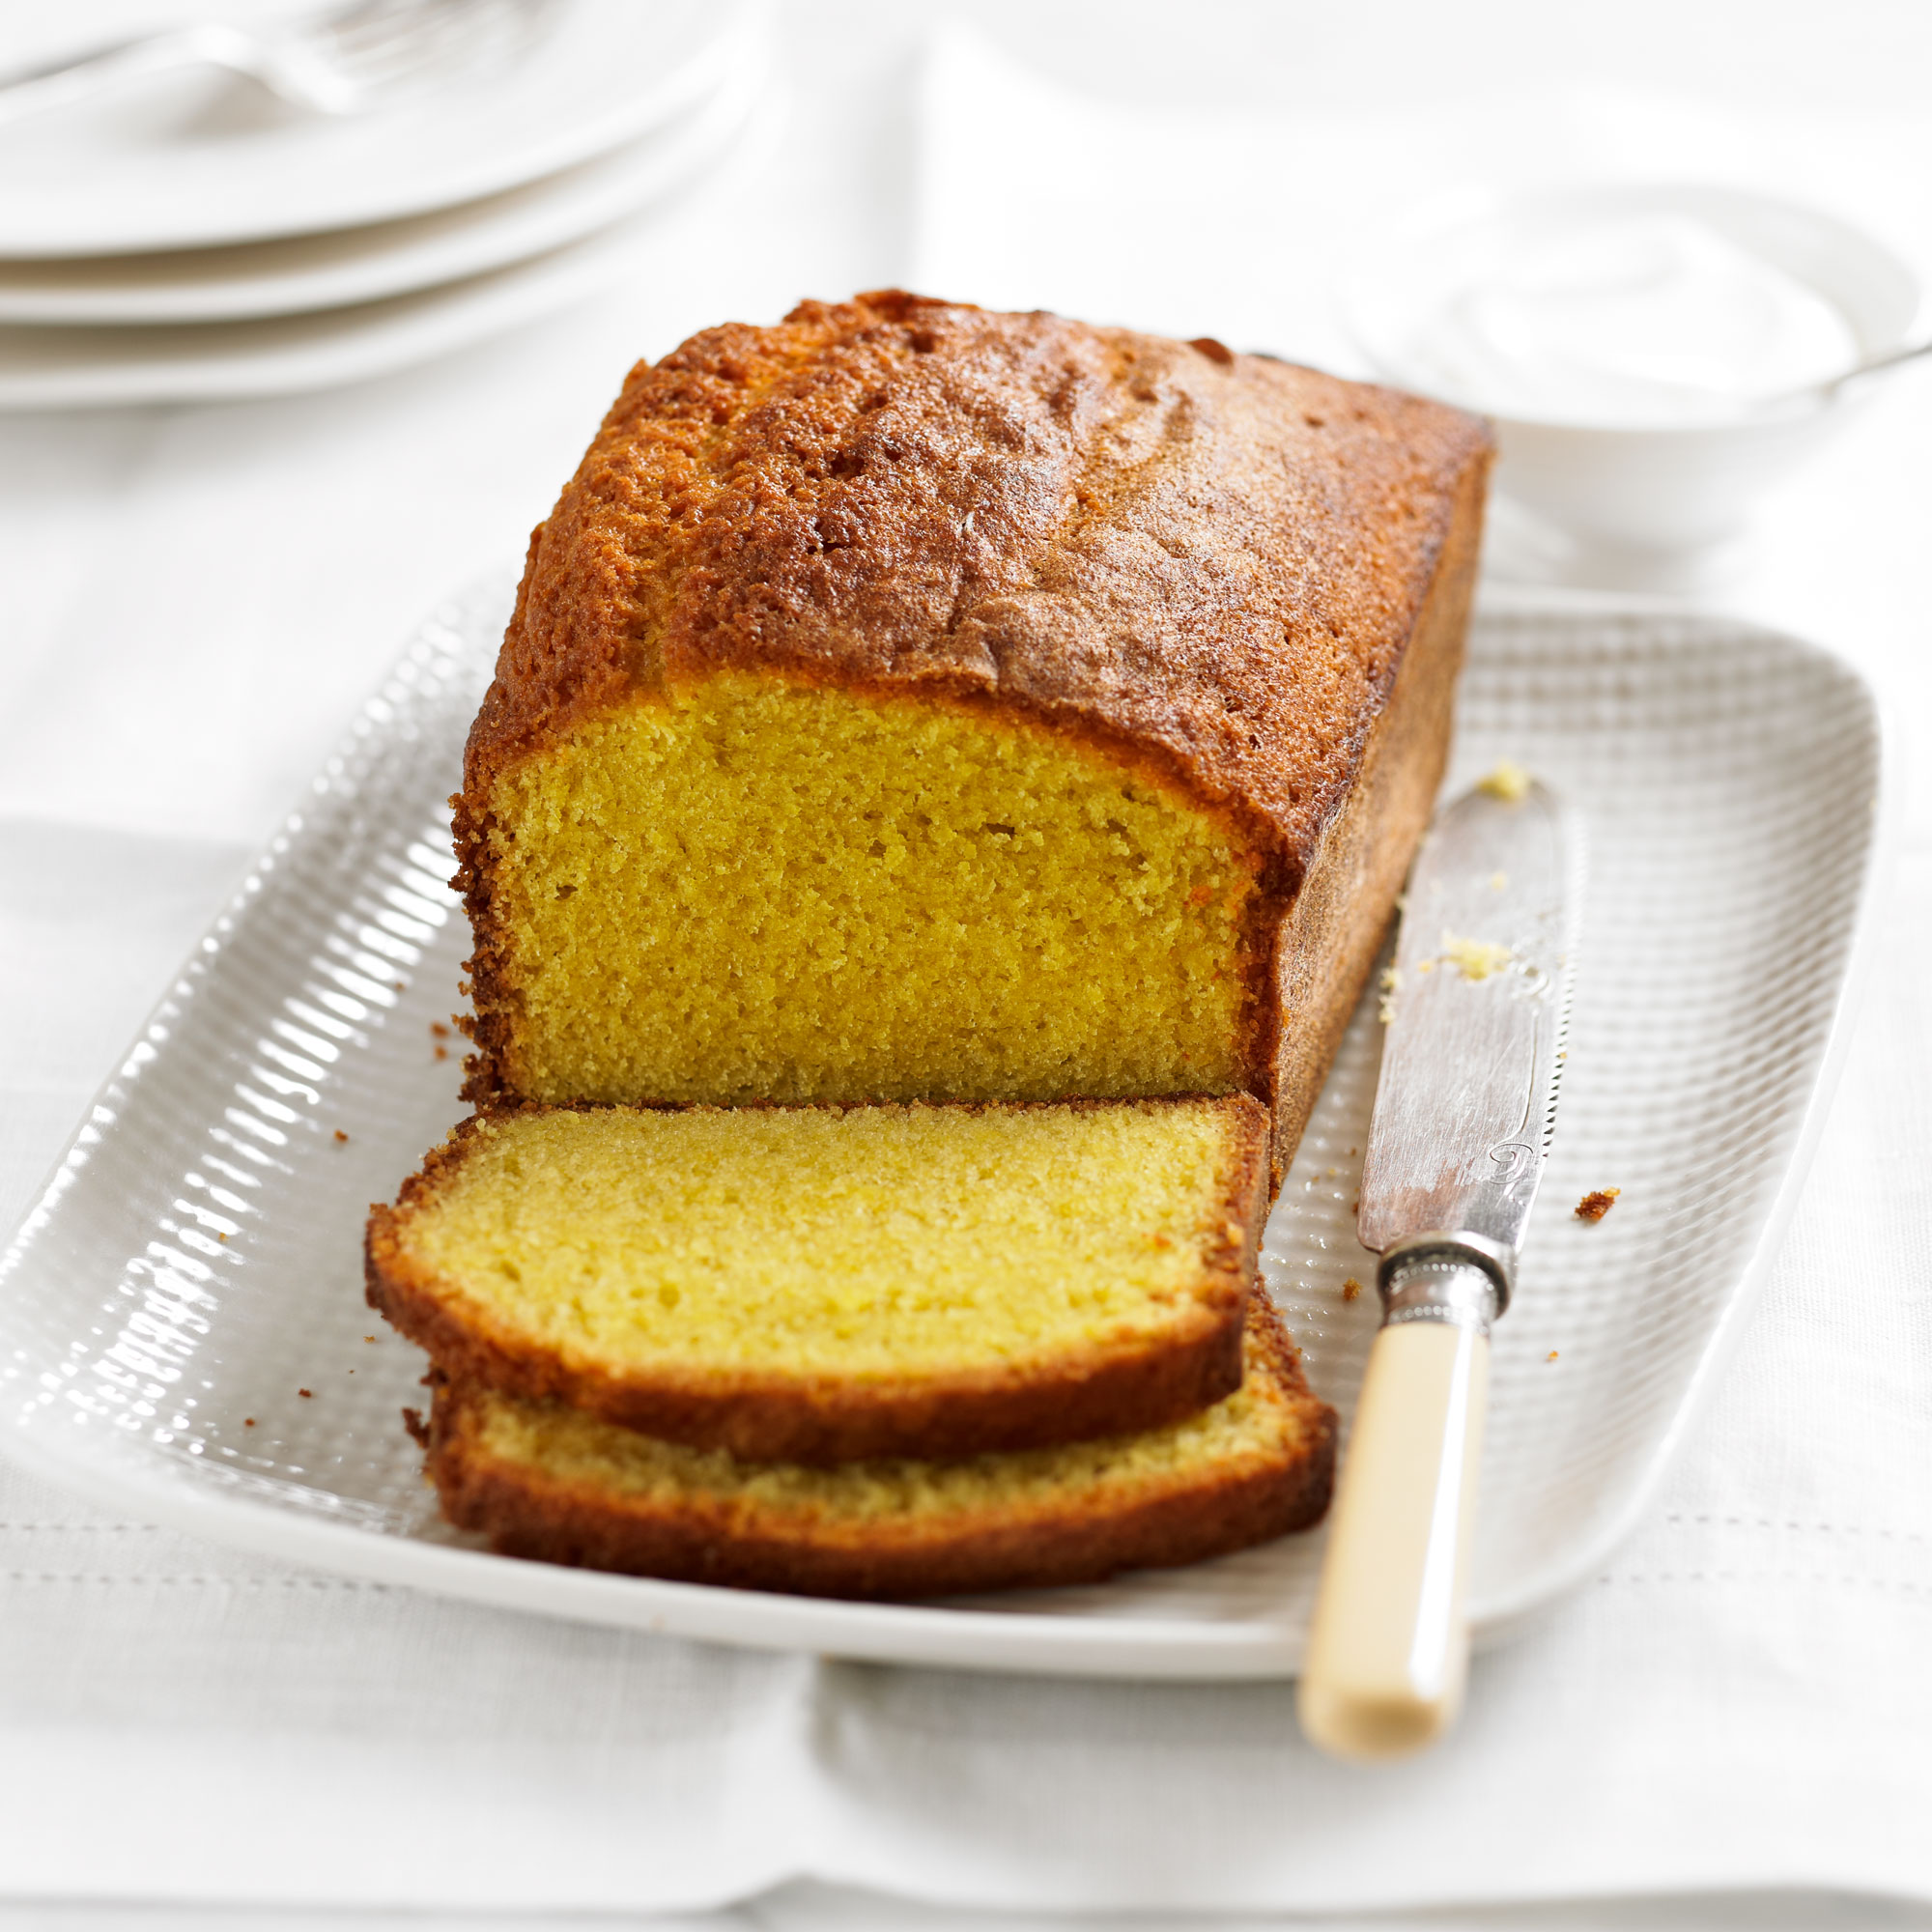 Baking The Perfect Madeira Cake - Lindy Smith's Tips and Recipe